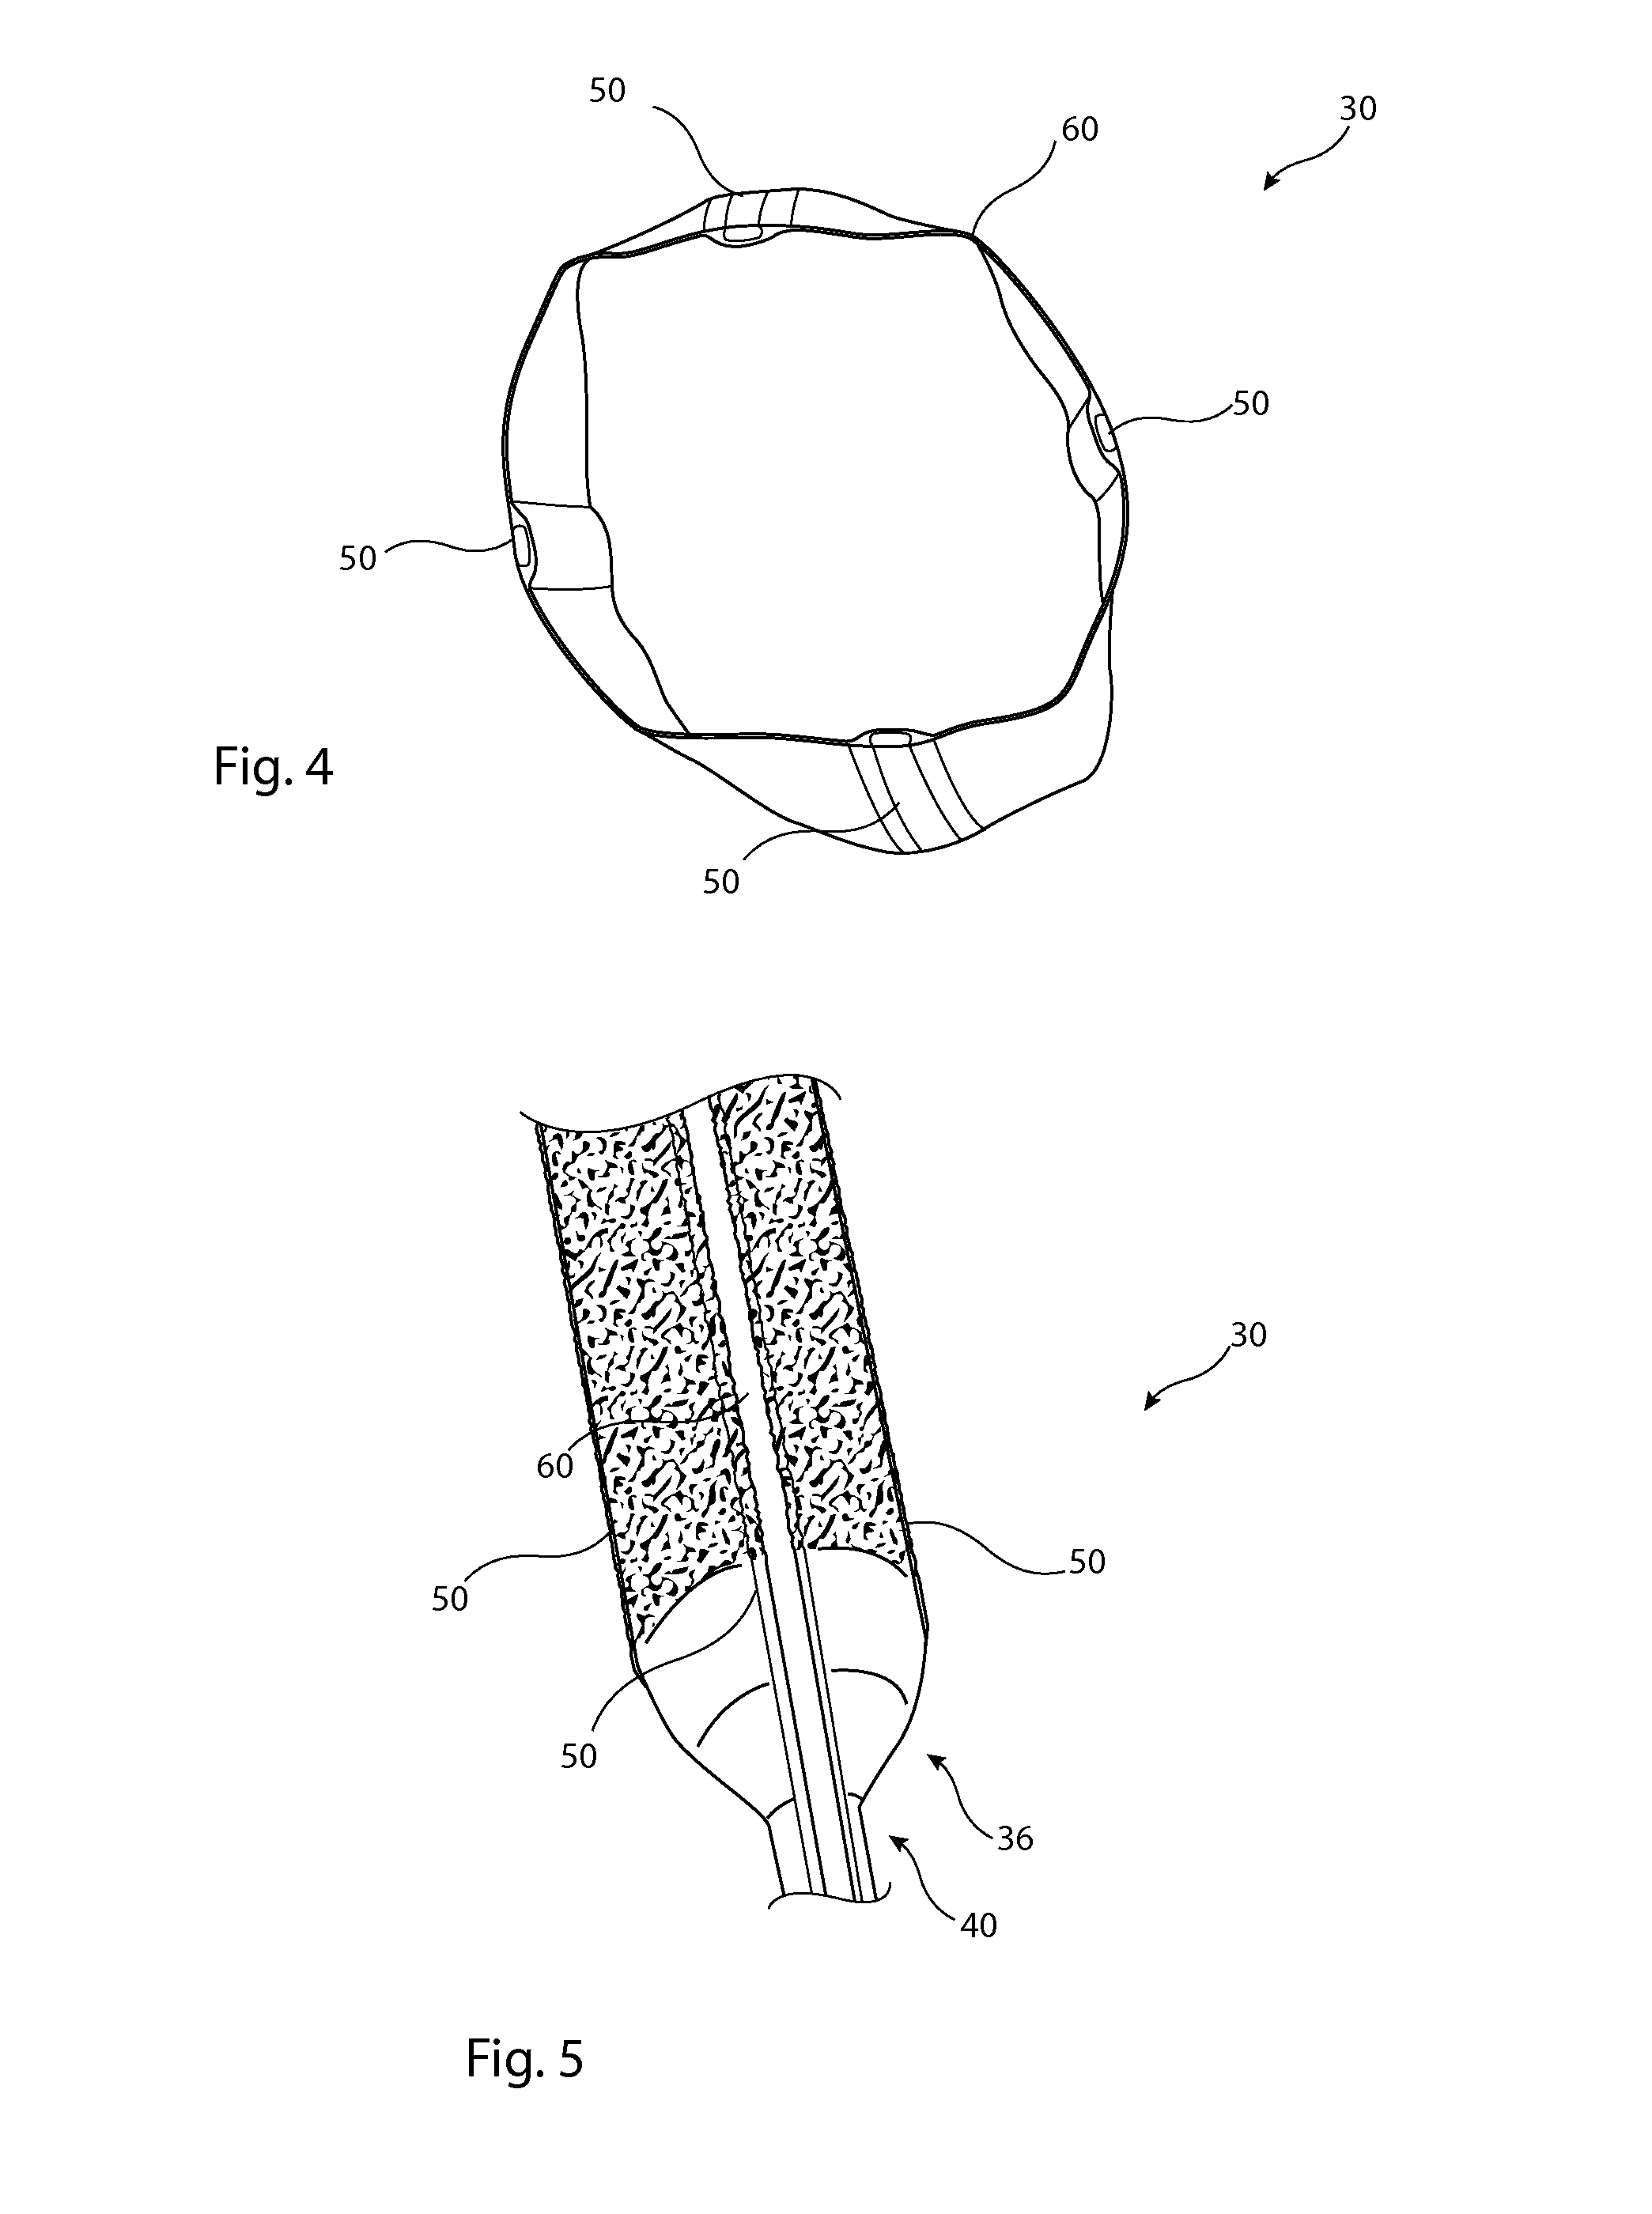 Shaped or textured medical balloon